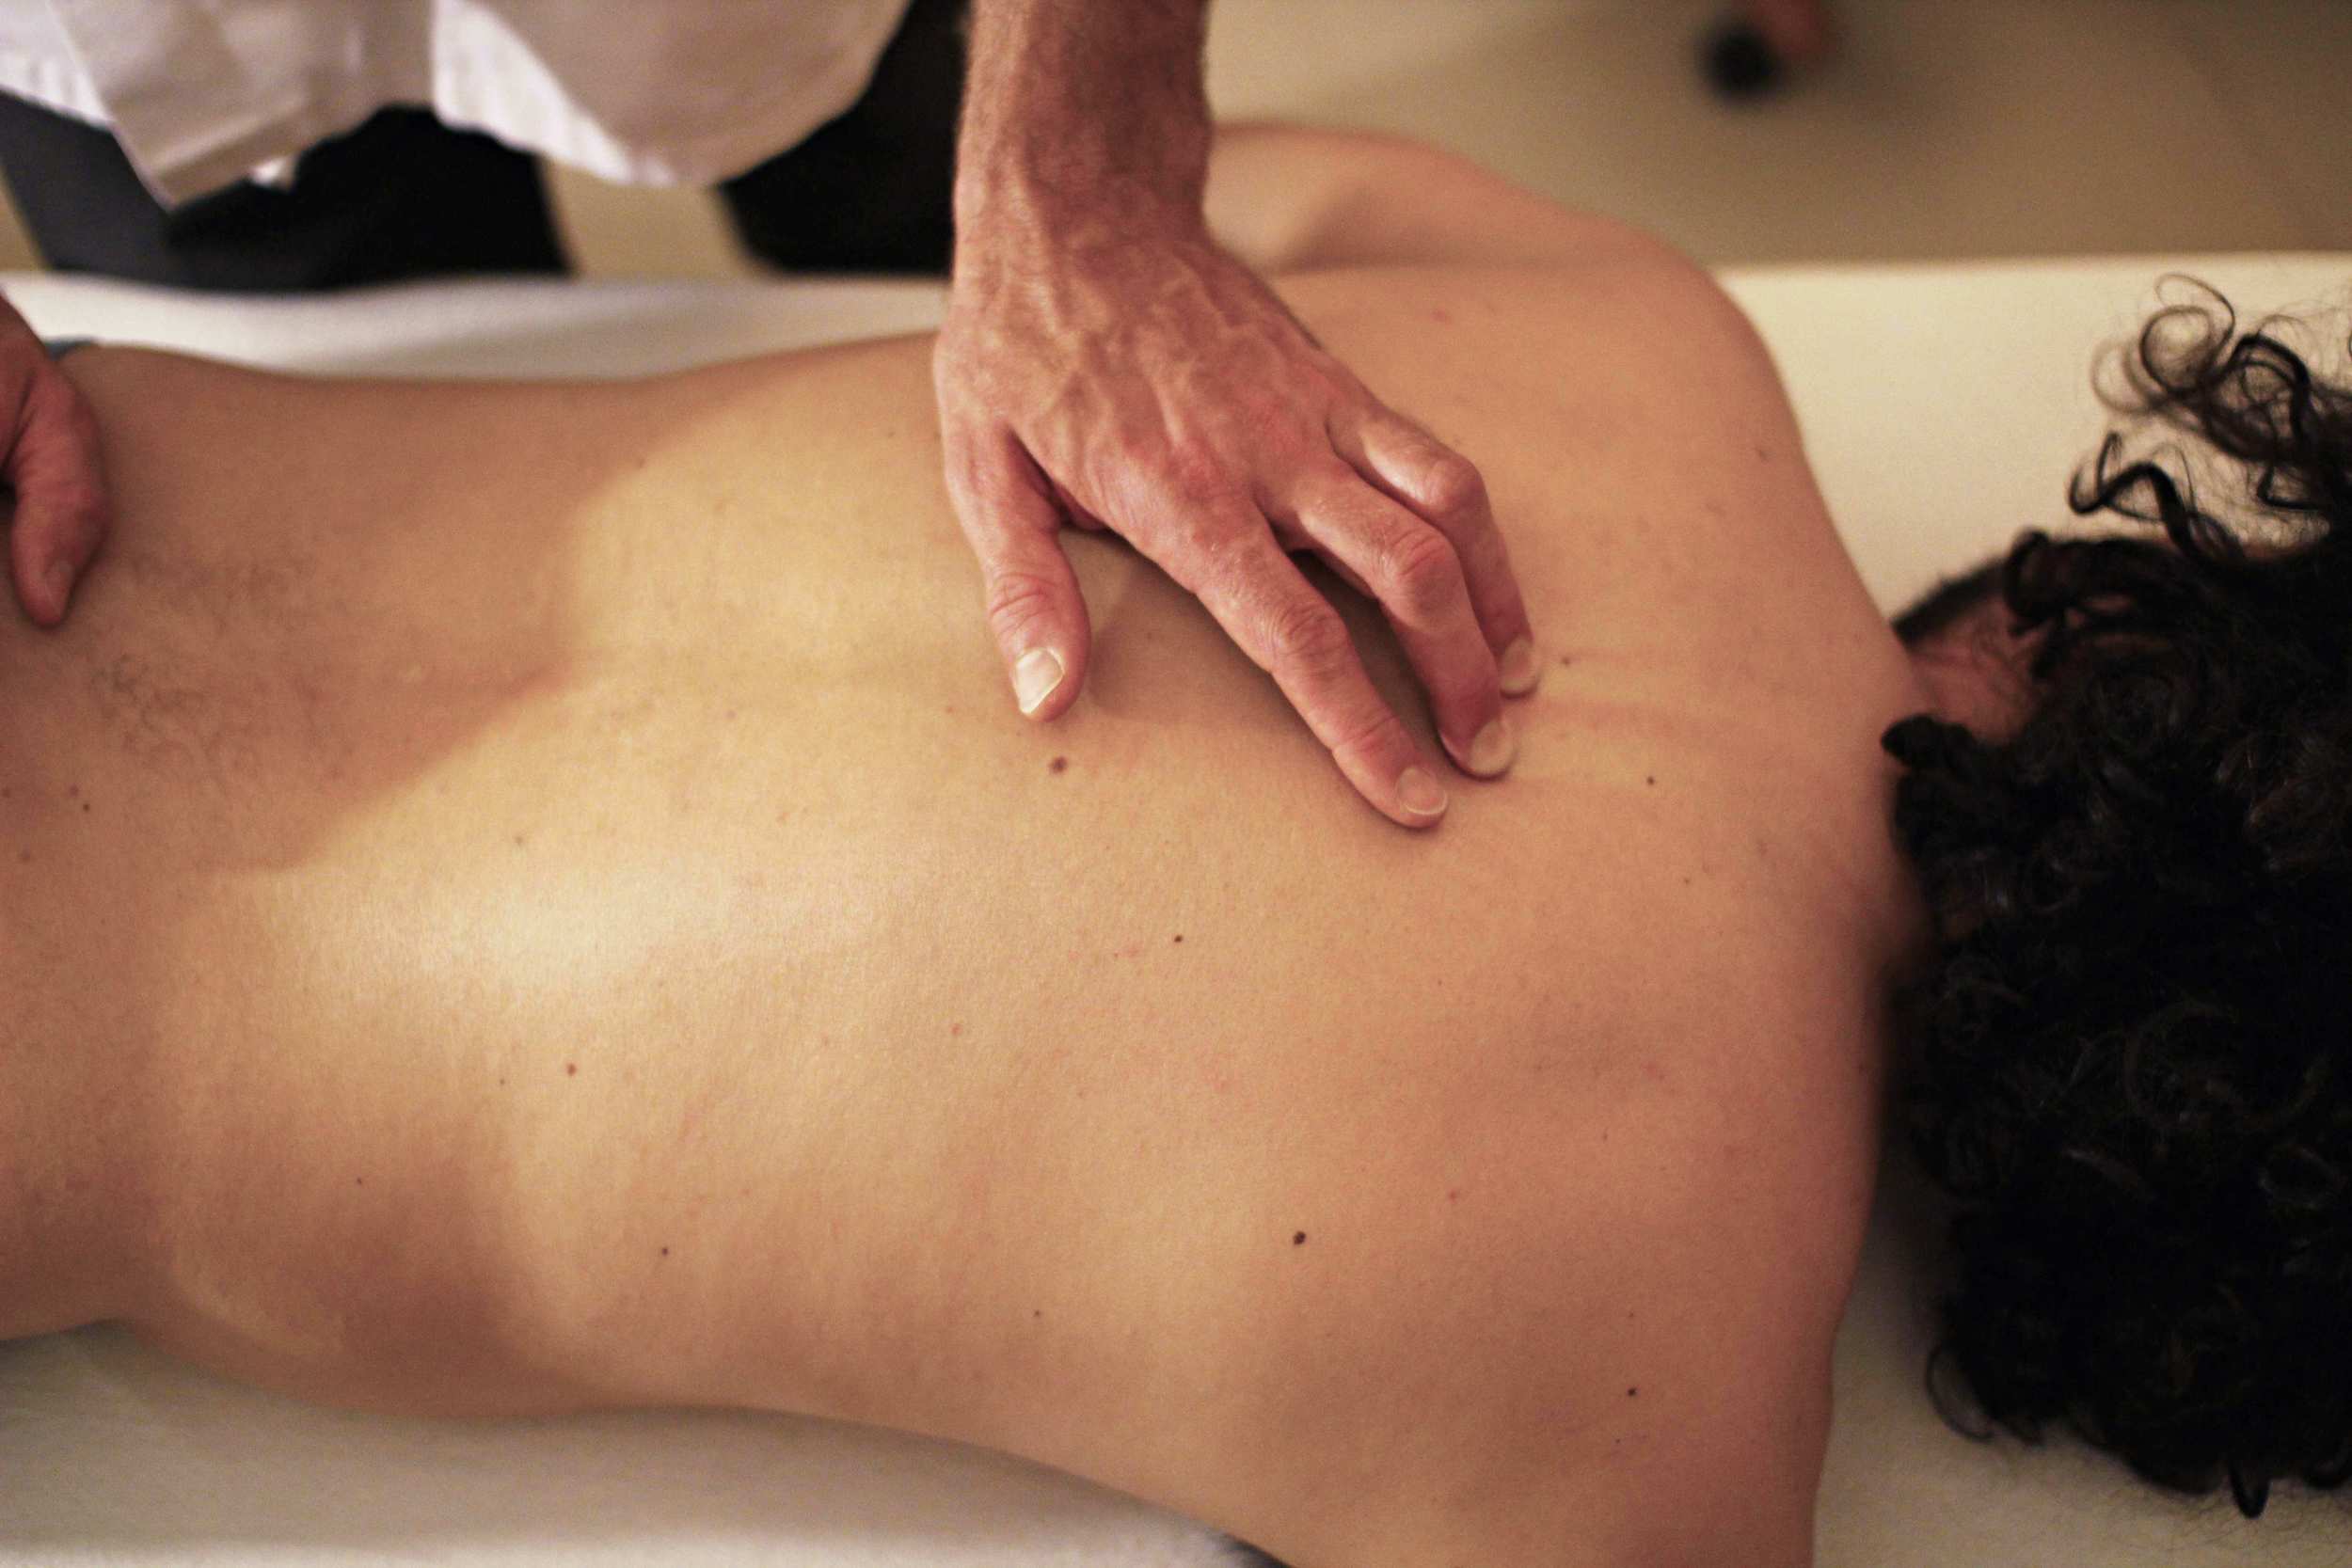 Osteopathy Massage and Acupuncture for hip problems